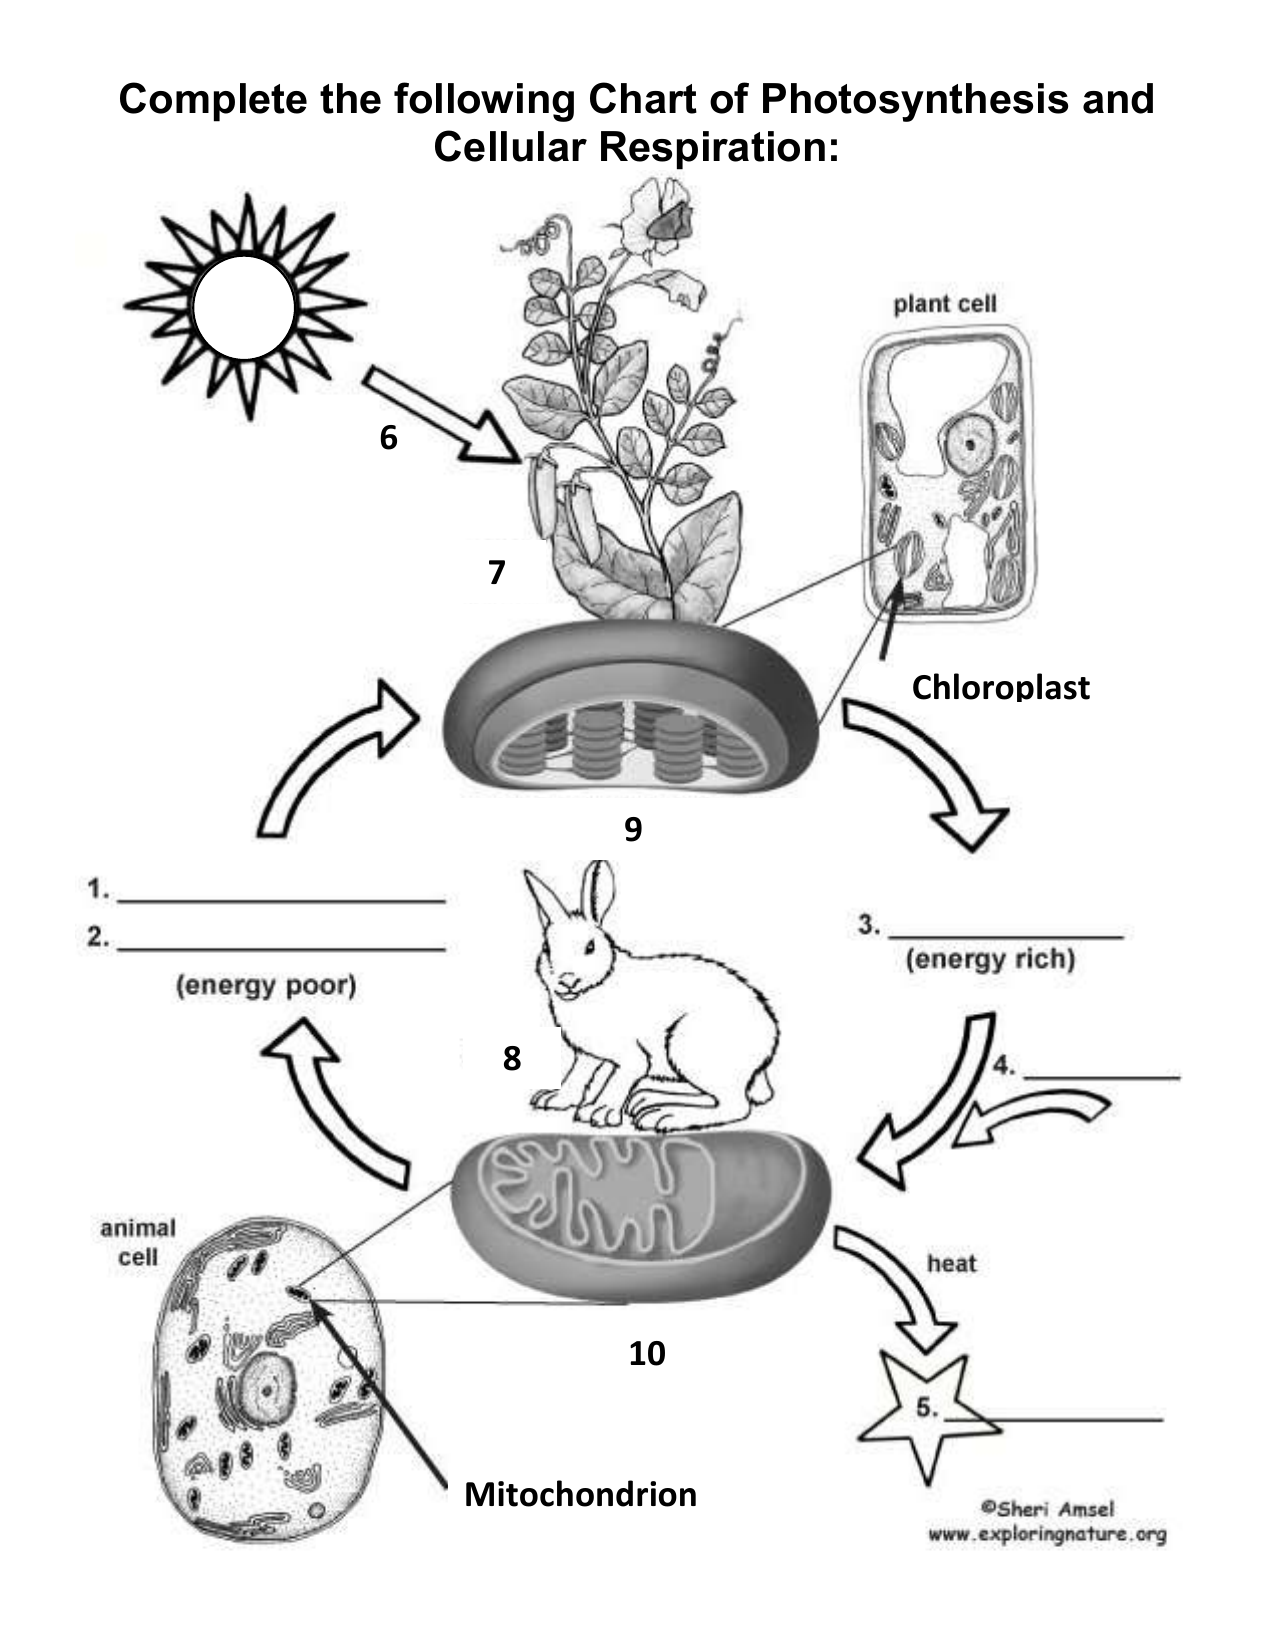 Photosynthesis and Cellular Respiration Cycle - Worksheet Inside Photosynthesis And Respiration Worksheet